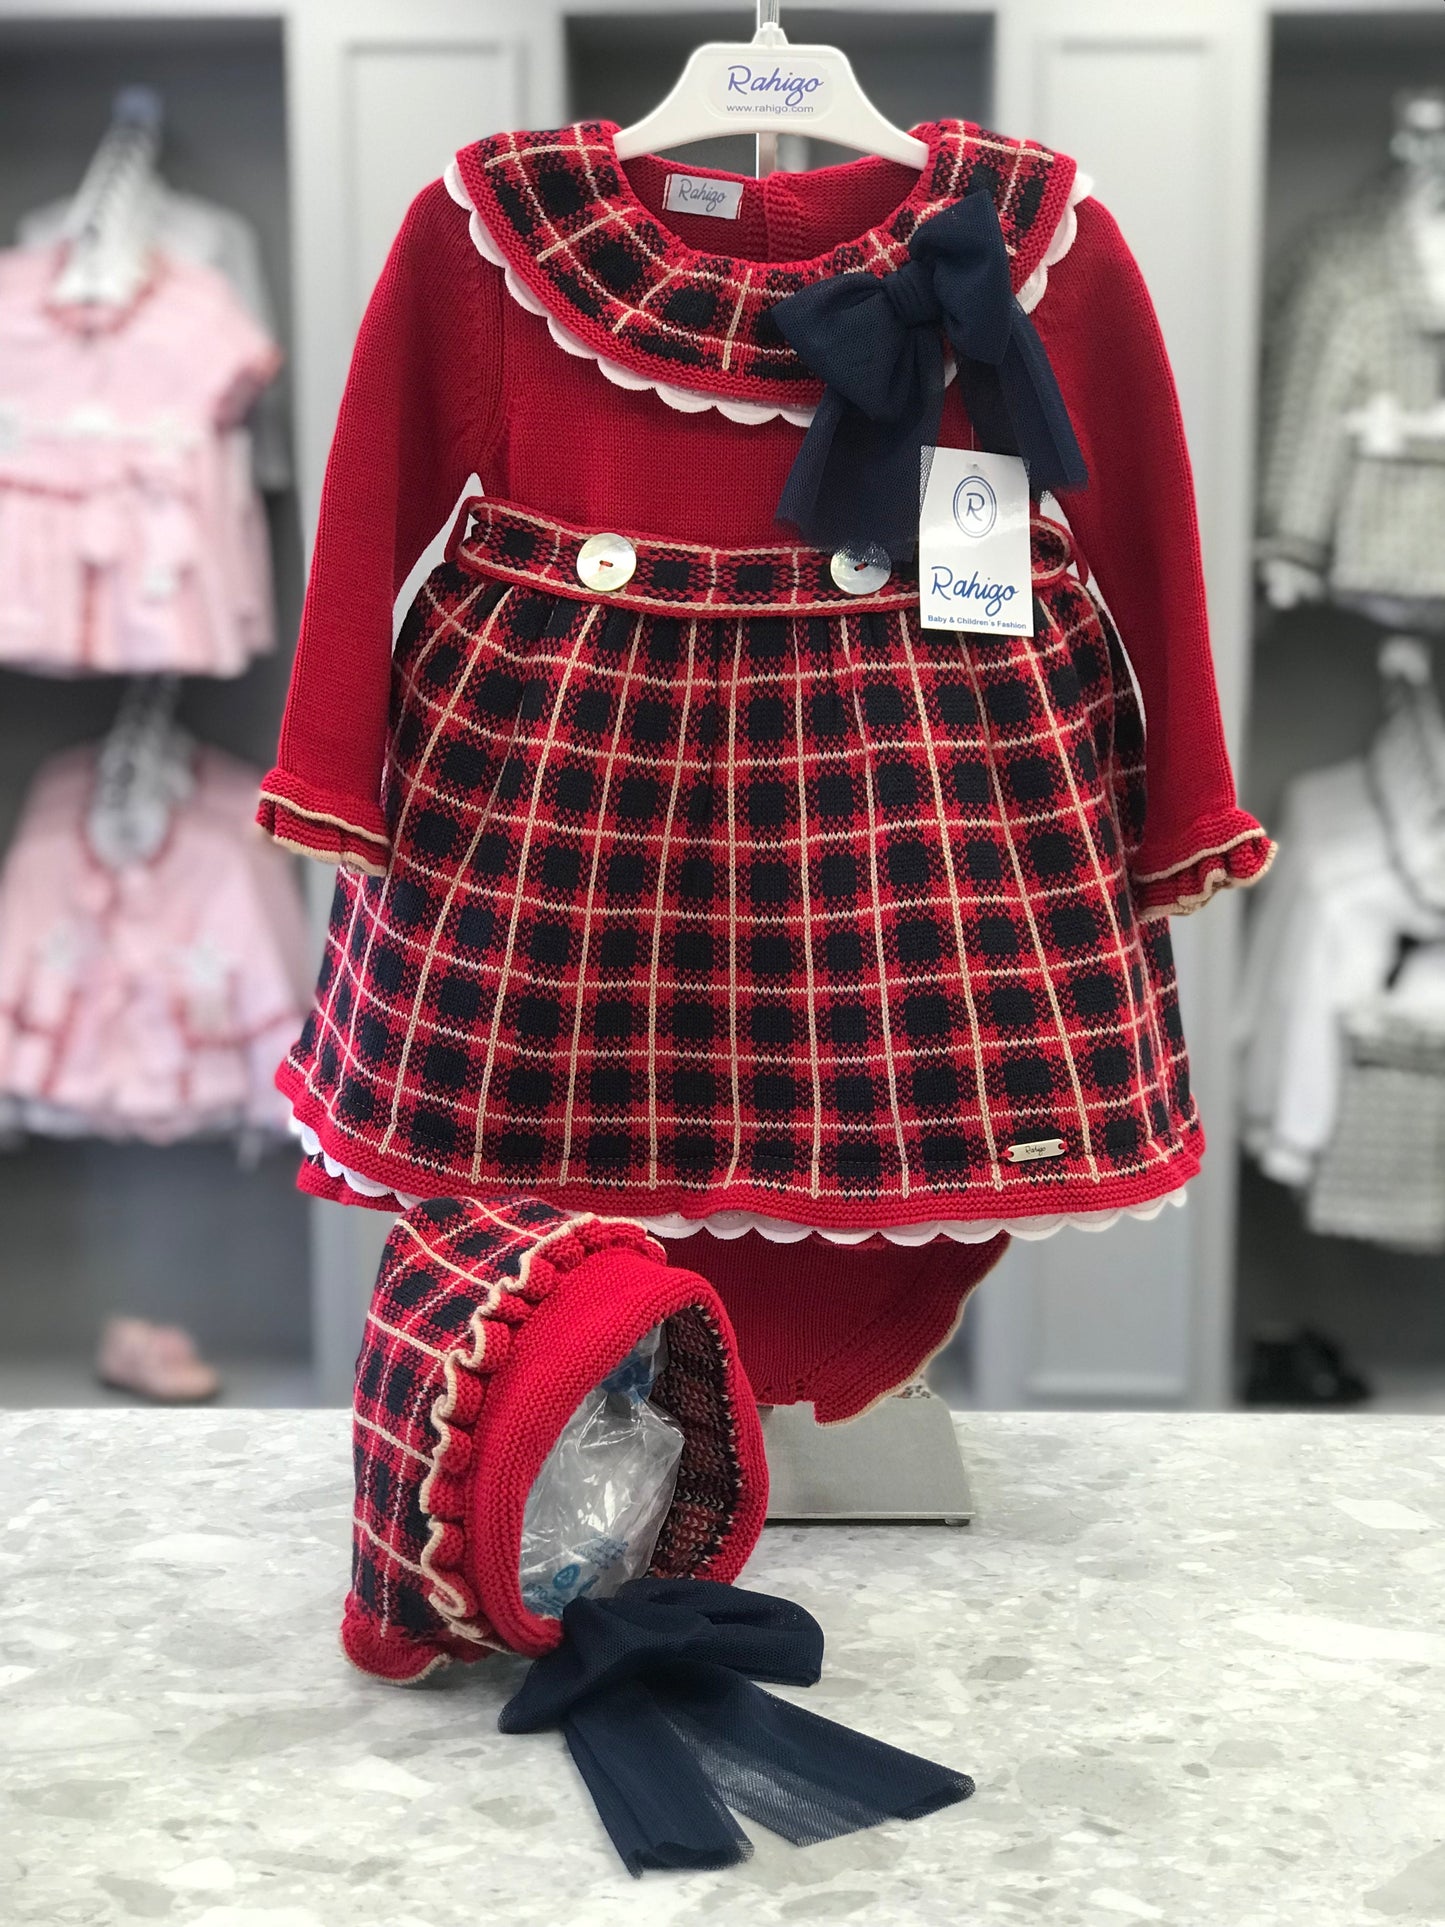 AW21 RAHIGO Red & Navy Baby Girls Knitted Dress with Bonnet & Bloomers - 21232/8